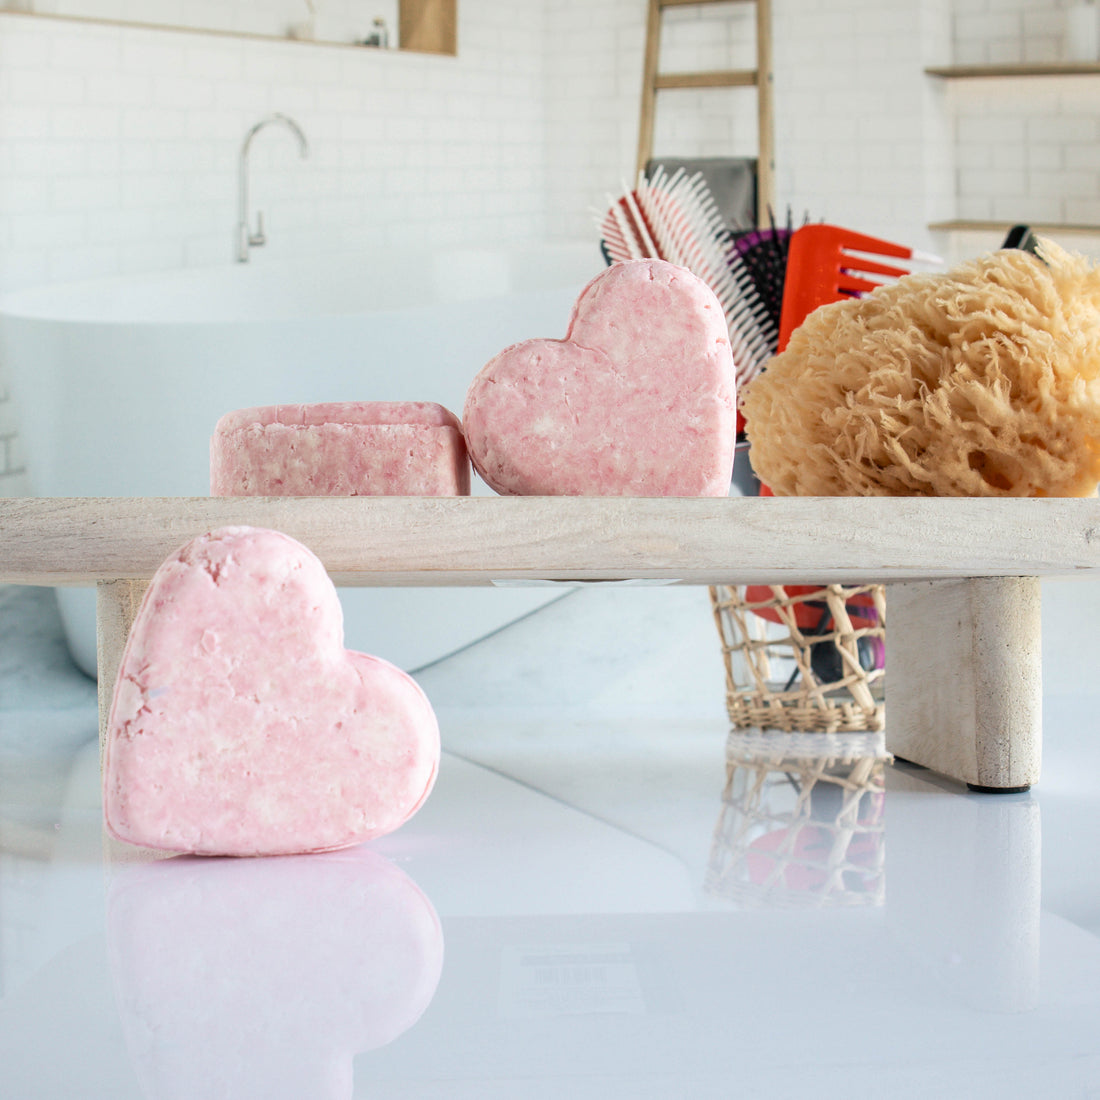 3 pink burst shampoo bars shaped in a heart. One is leaning on its side while the other two are on a trey, one leaning on the other. there is a loofah next to them with a cup of hair tools in the background